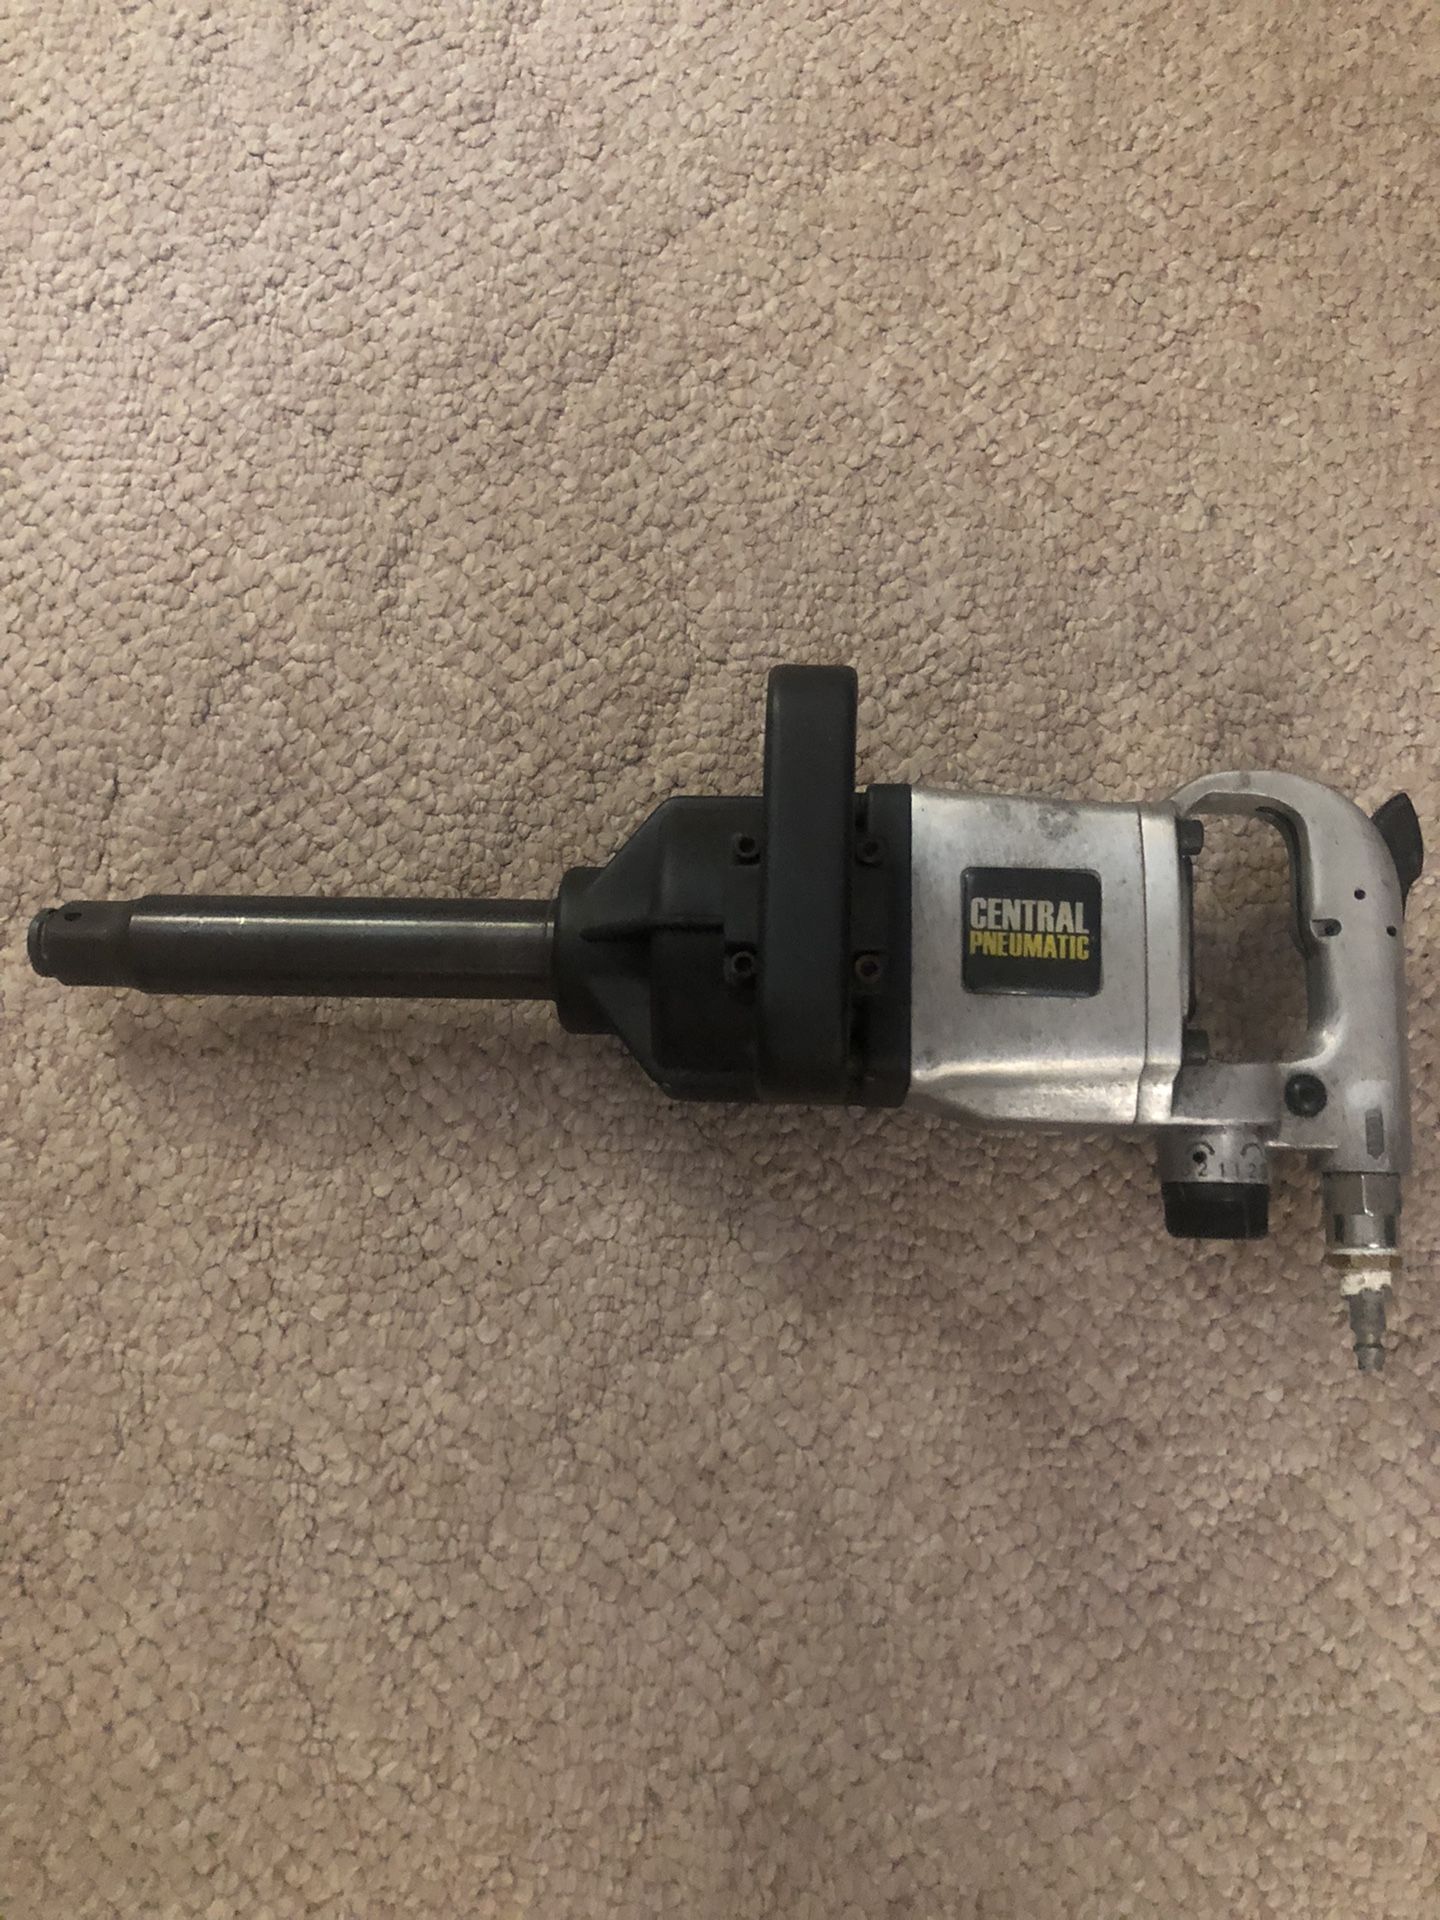 1” Industrial Air Impact Wrench 